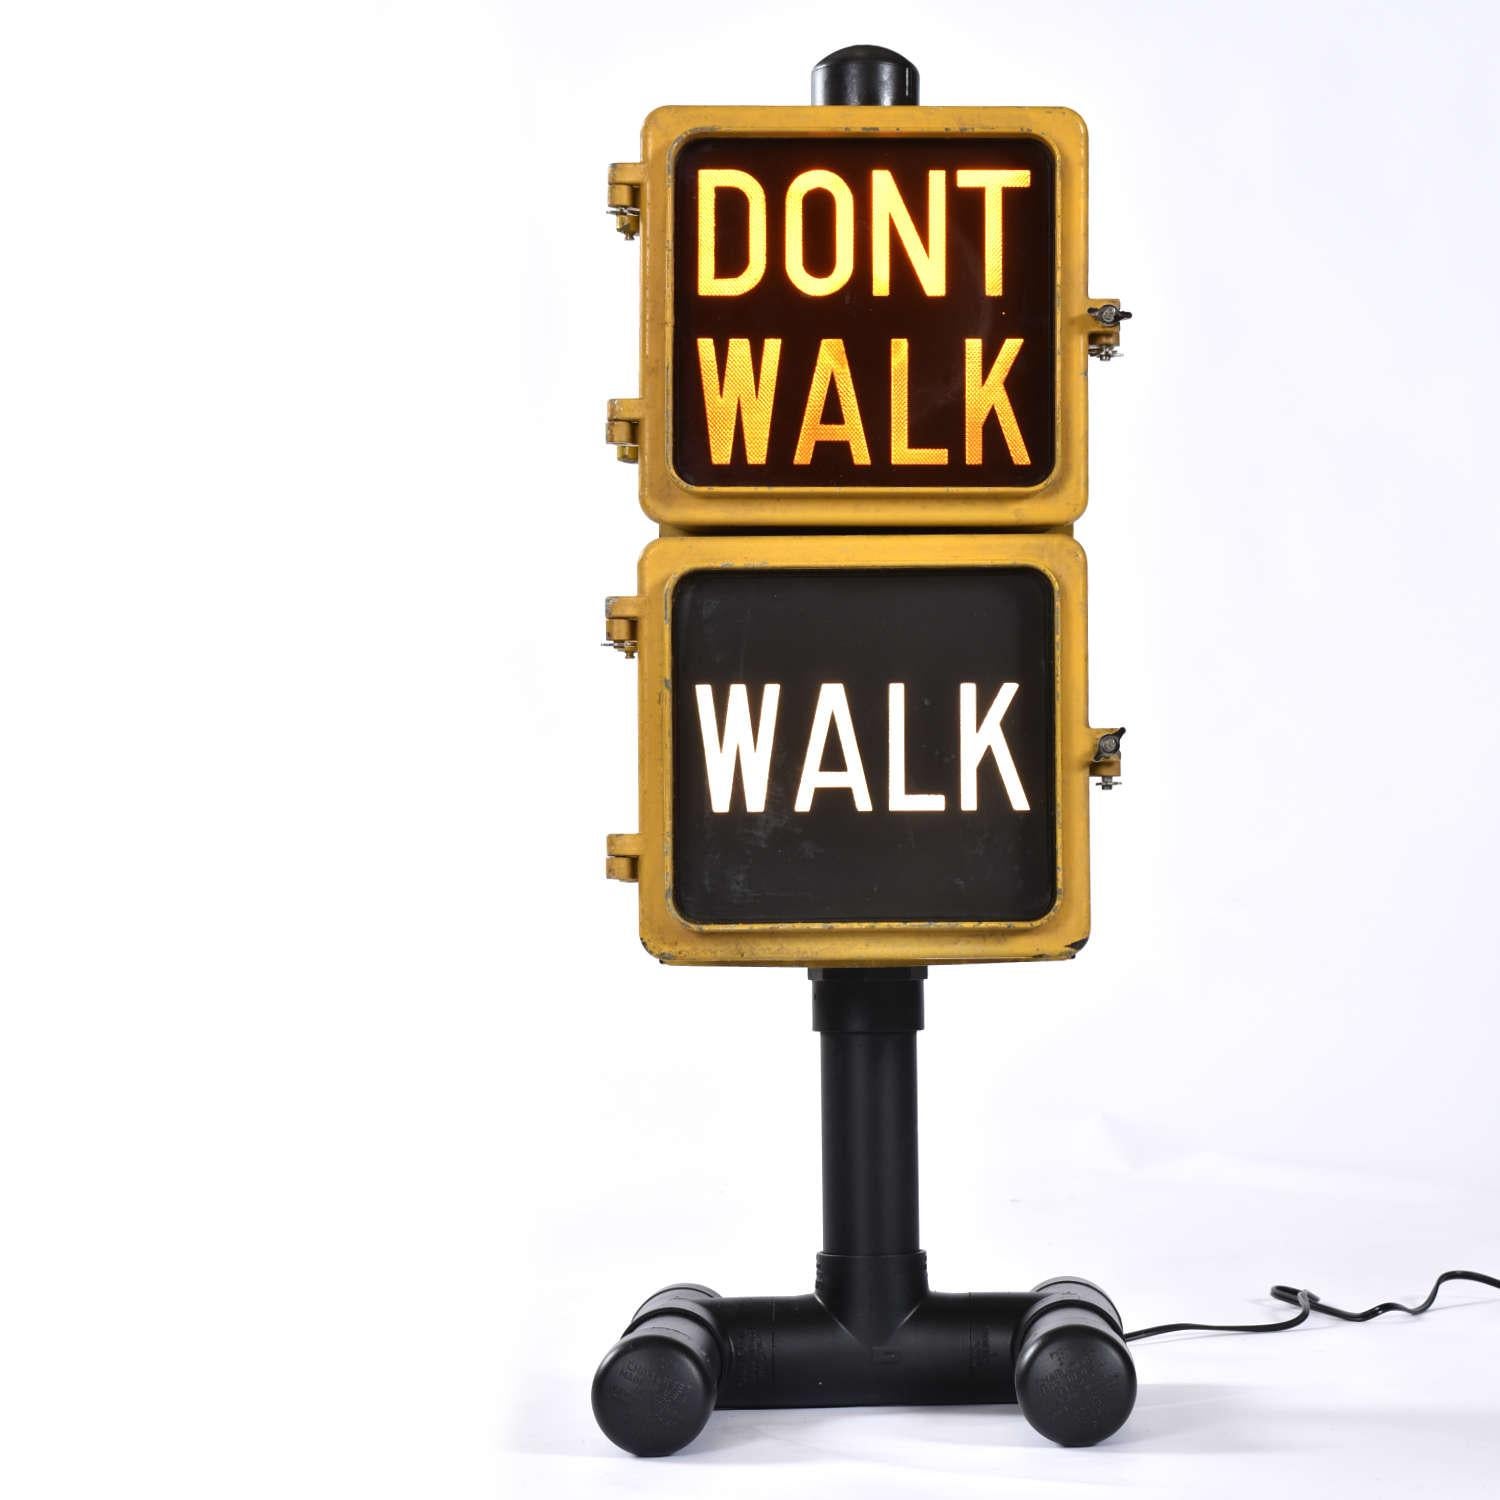 Vintage Eagle Signal walk traffic signal. This authentic “walk” / “don’t walk” traffic signal has been refurbished to be used as a table lamp. Our restoration team re-wired the lamp with an on/off toggle switch on the power cord. Both the “Walk” and